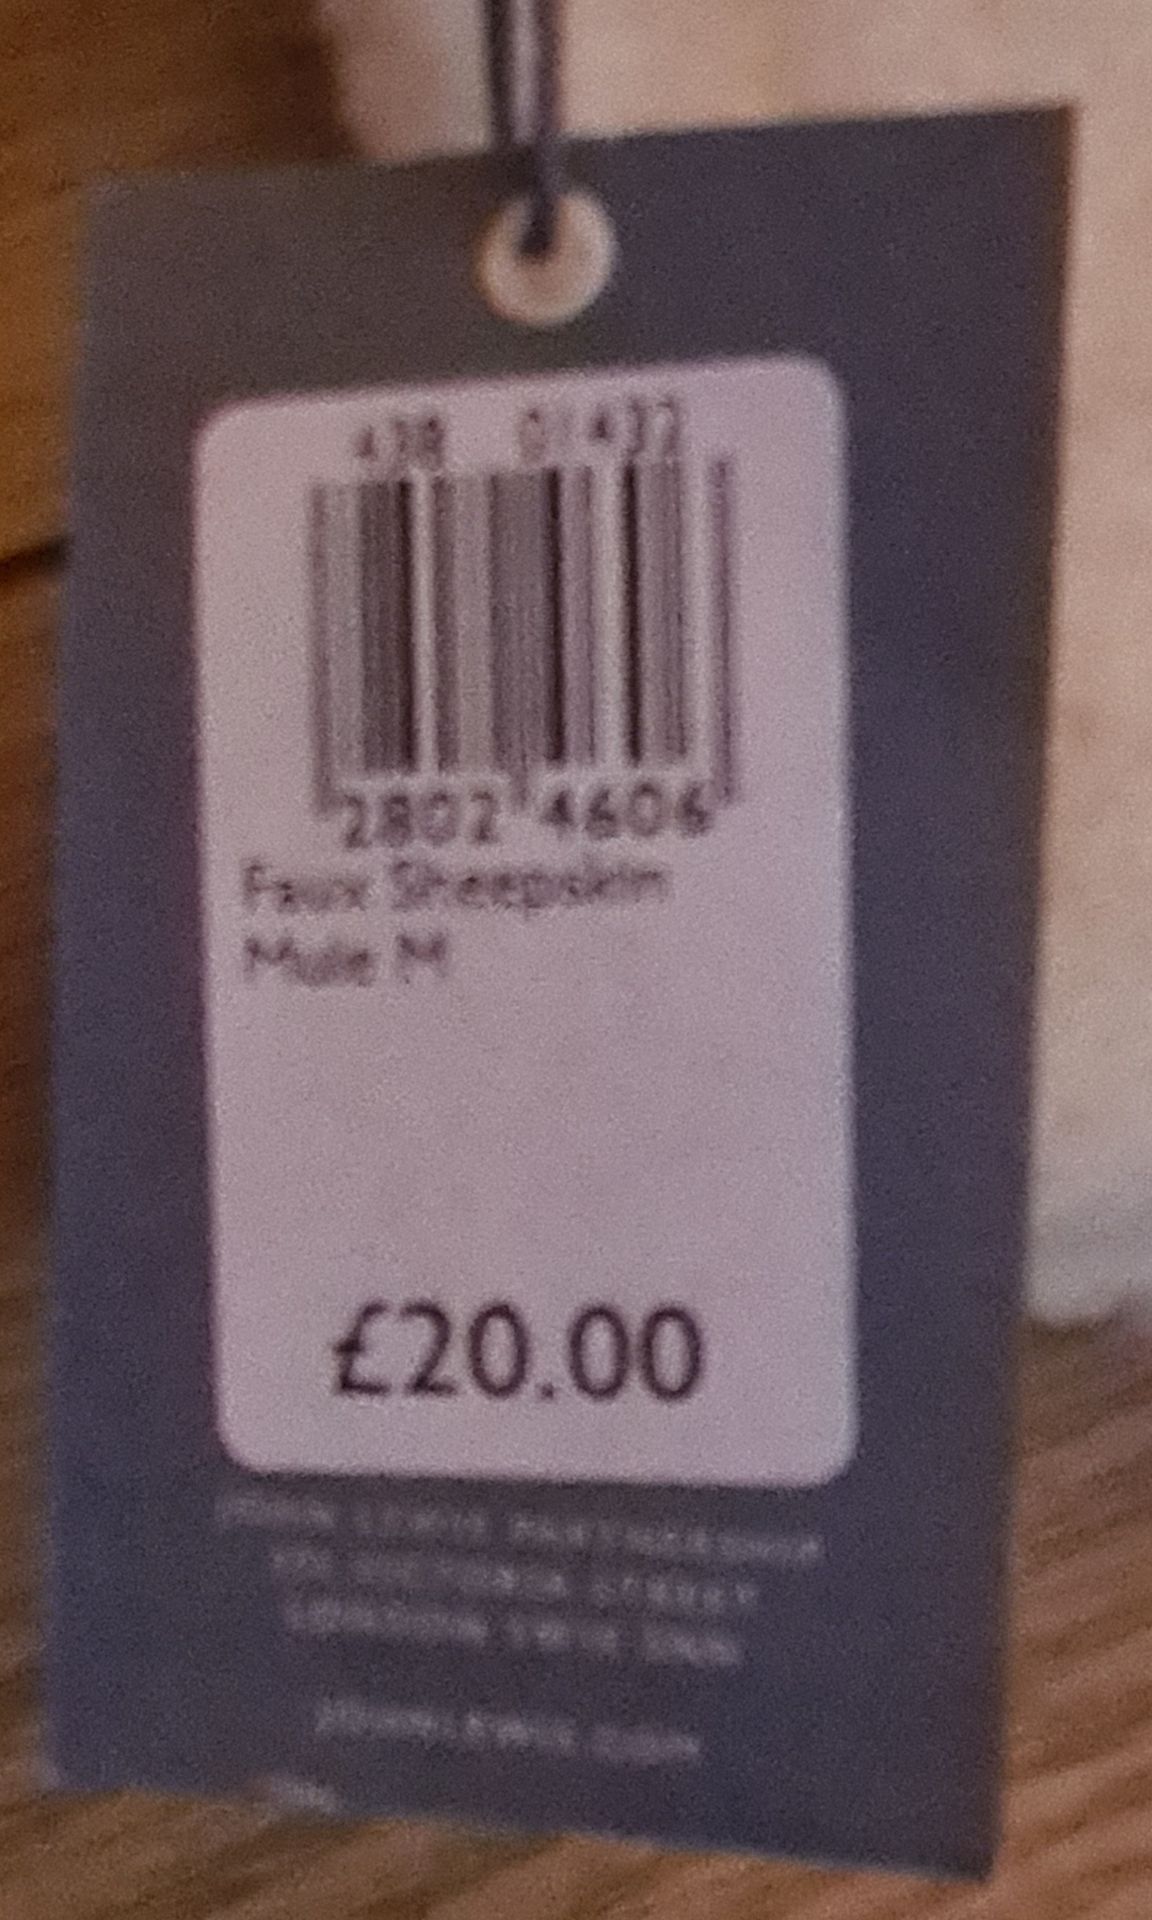 10 Sets Brand New John Lewis Slippers Size M RRP £20.00 Each - Image 3 of 3